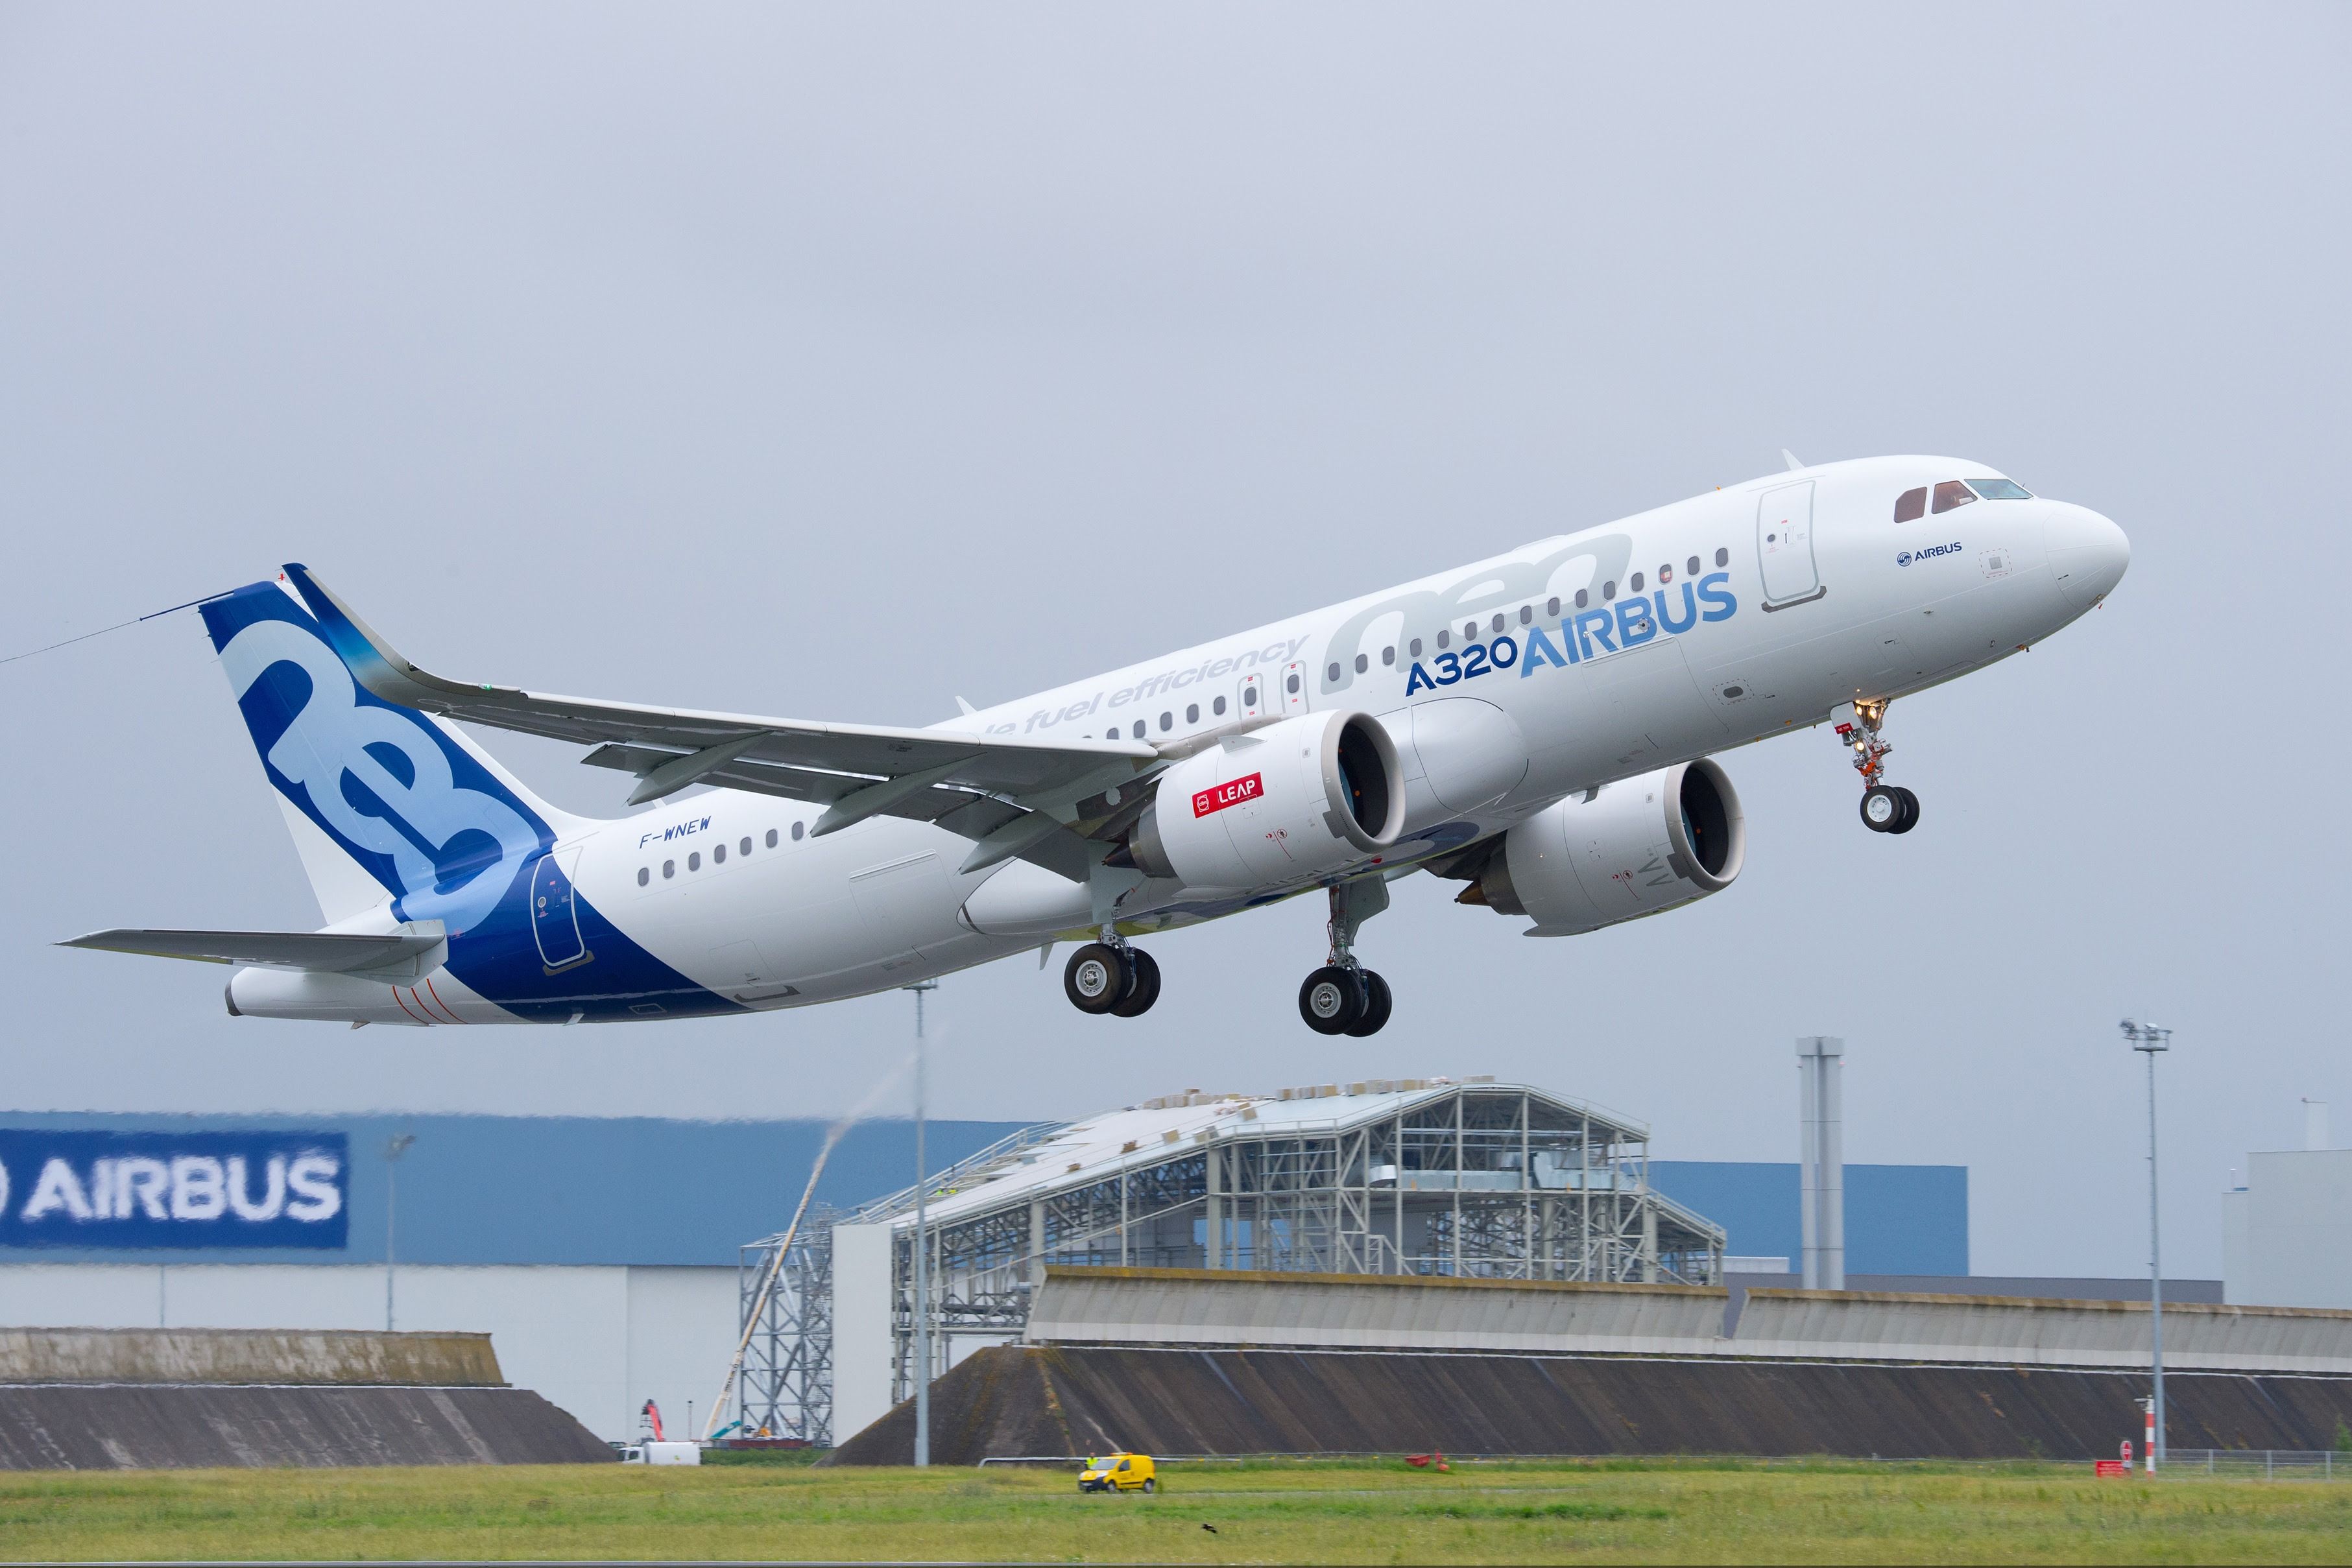 An Airbus A320neo taking off